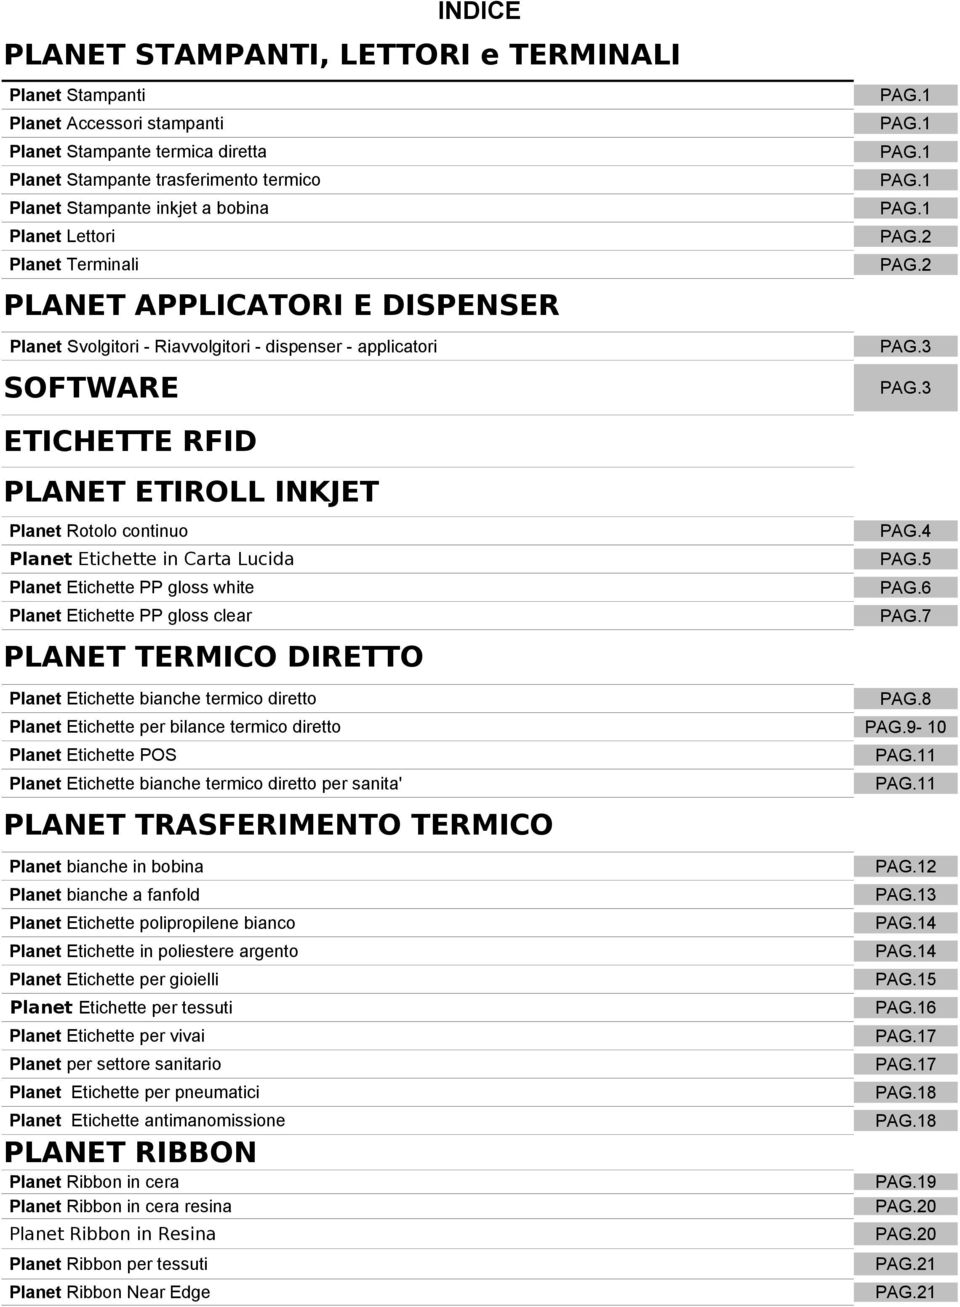 Planet Etichette in Carta Lucida PAG.5 Planet Etichette PP gloss white PAG. Planet Etichette PP gloss clear PAG.